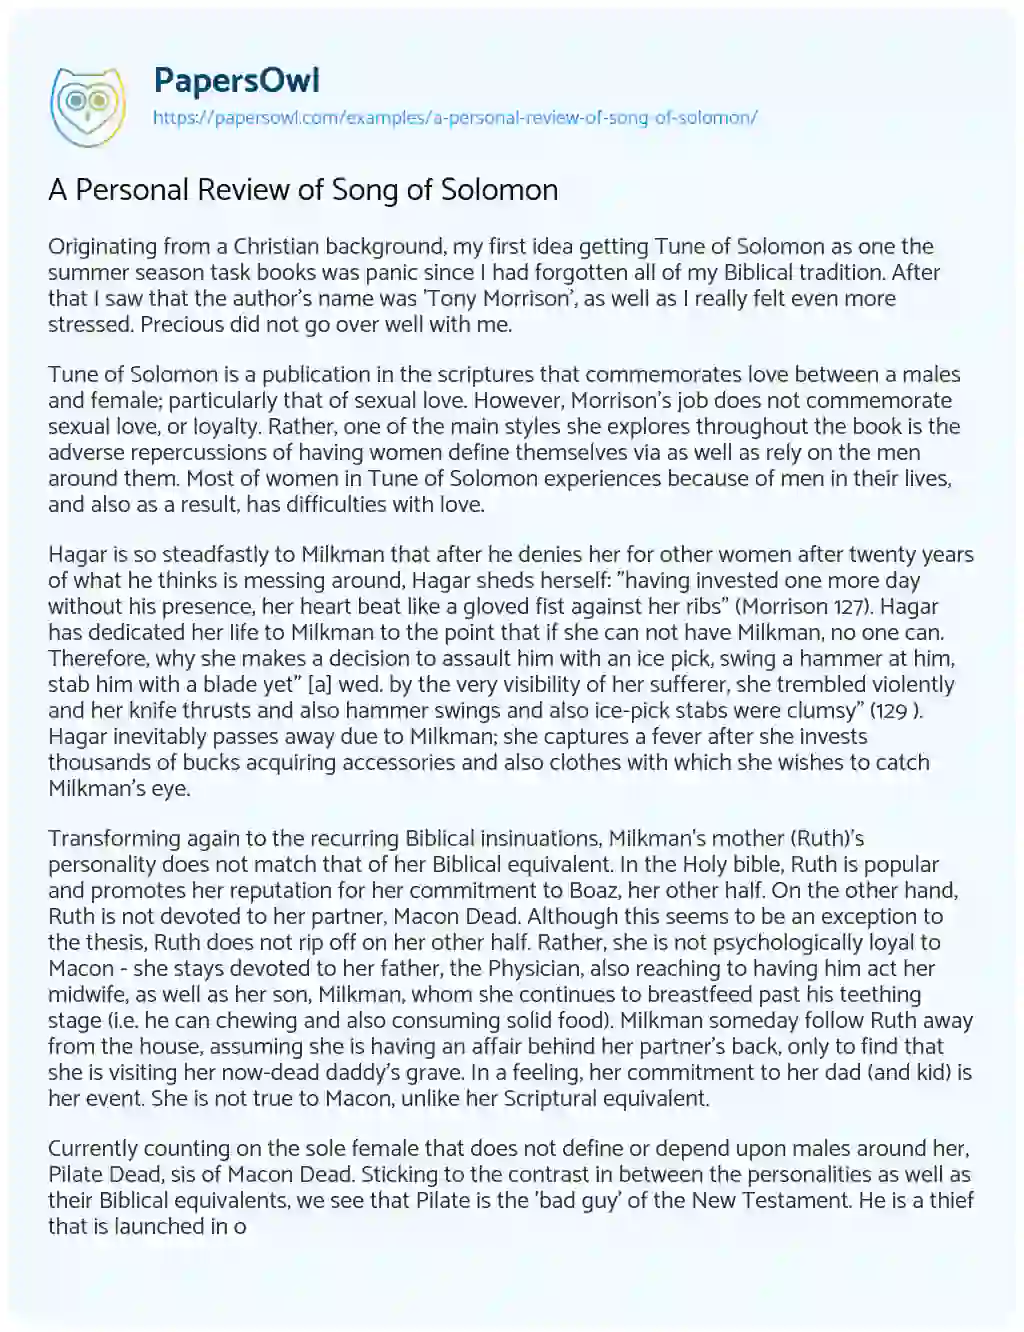 Essay on A Personal Review of Song of Solomon